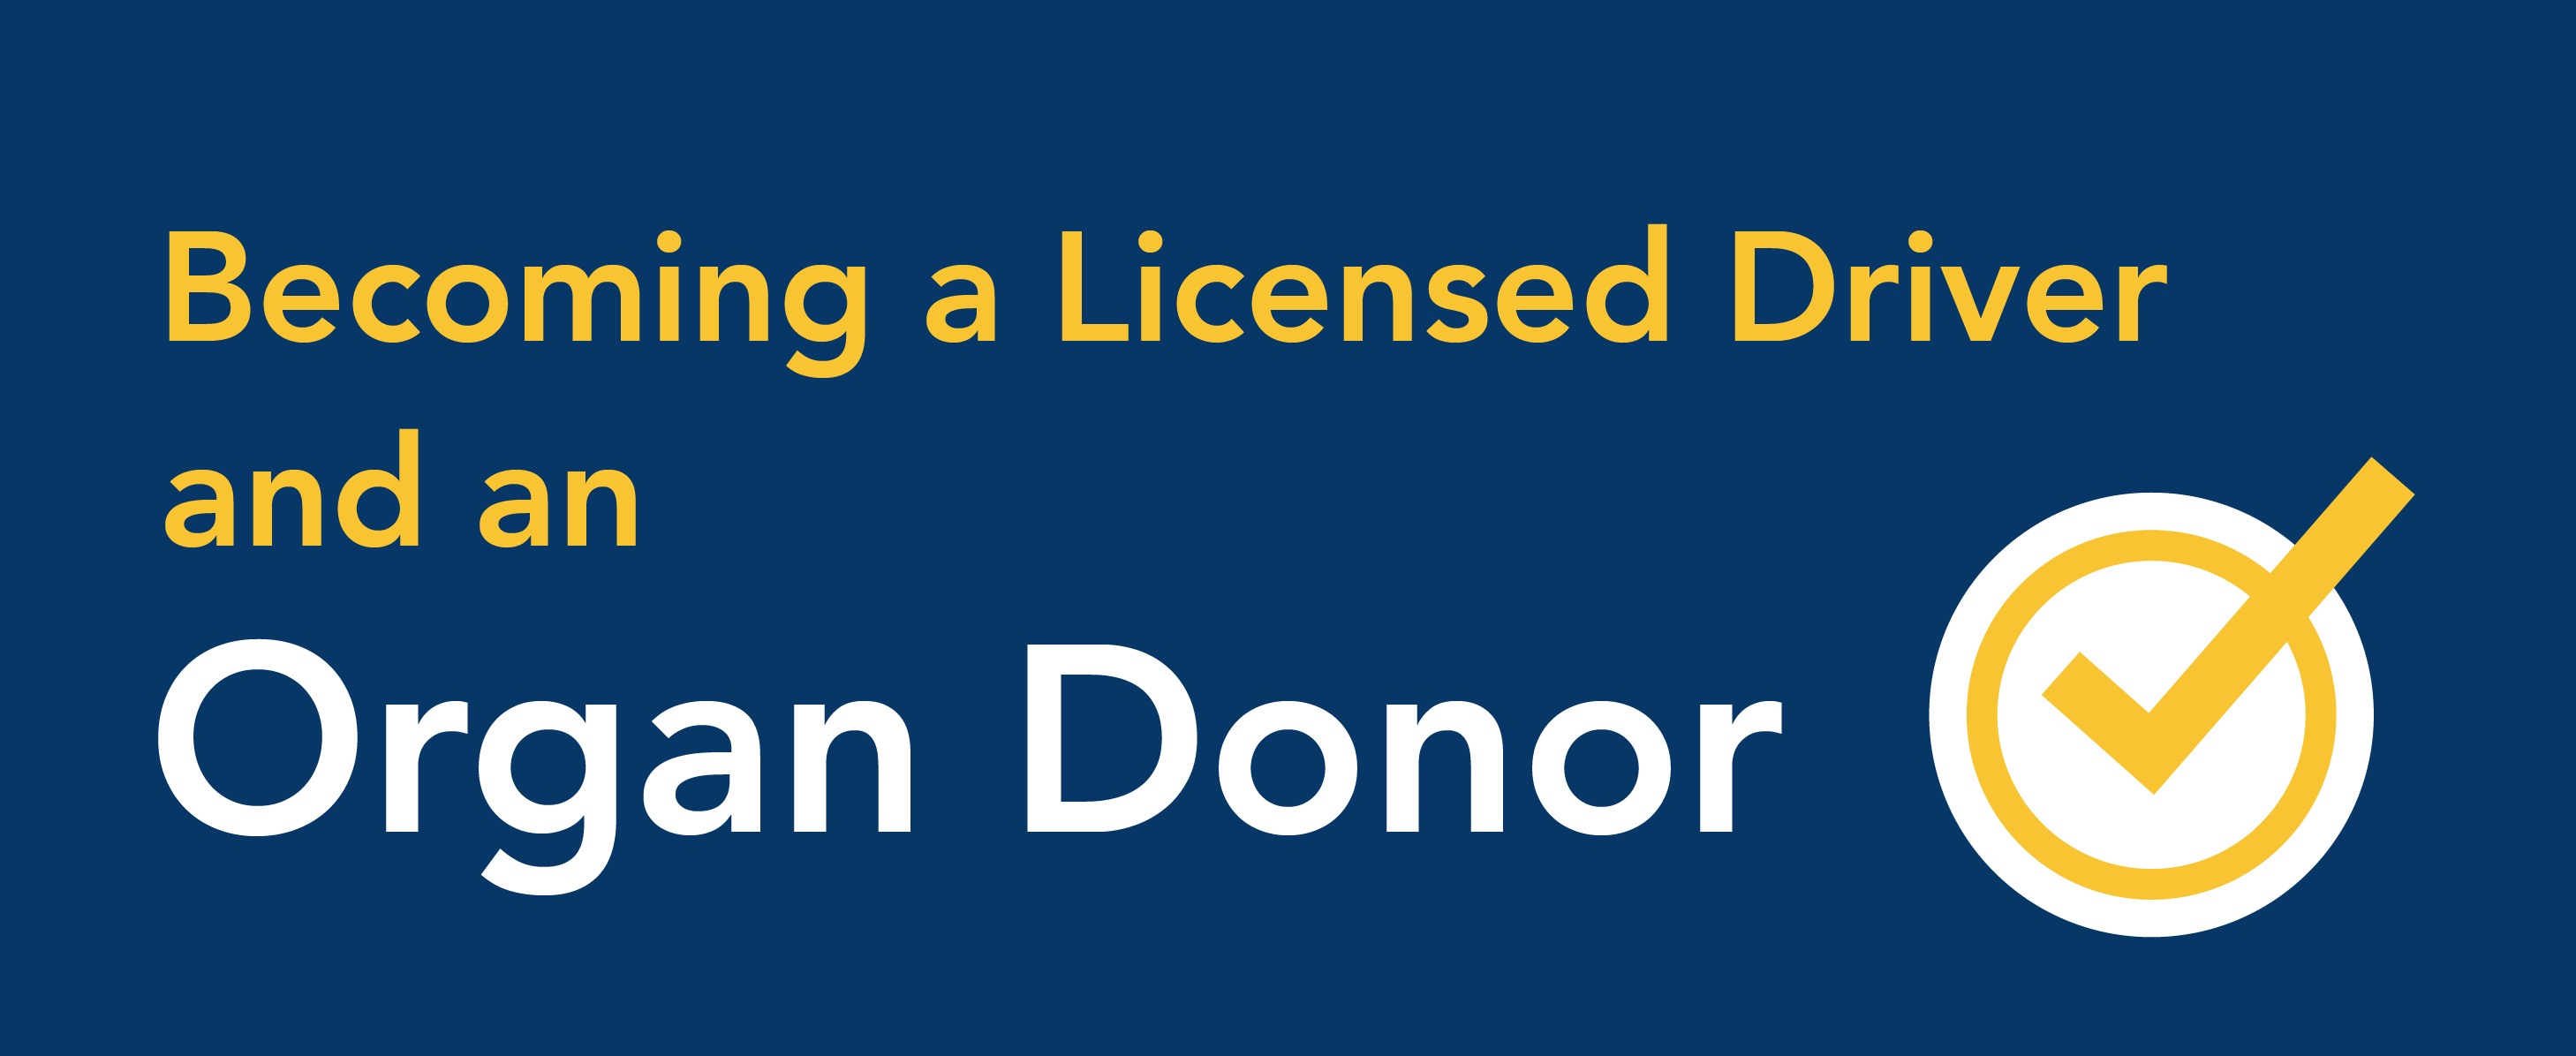 Becoming a licensed driver and an organ donor.